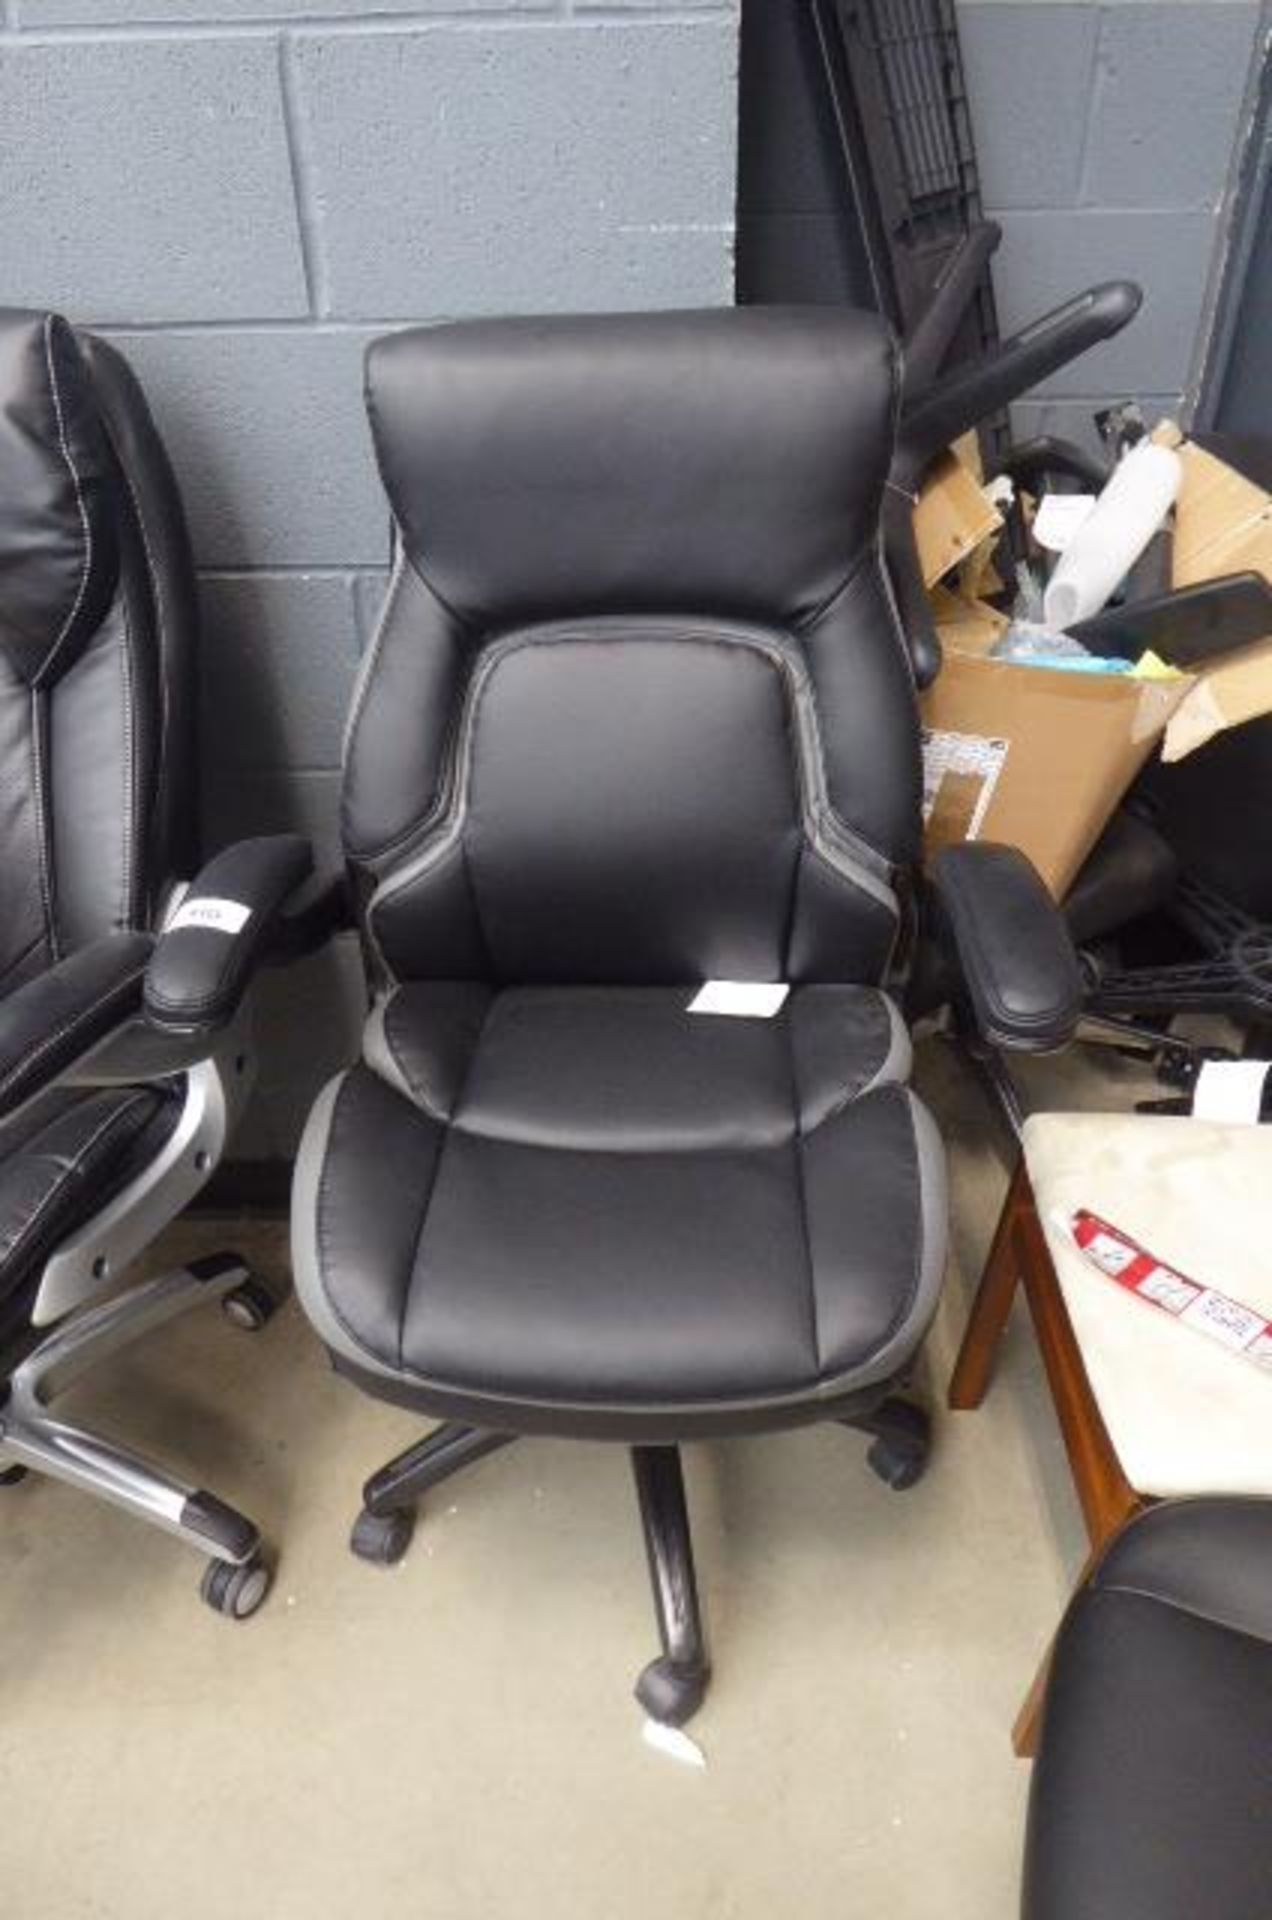 Black and grey high back executive armchair No rips or tears. Height adjustment works.